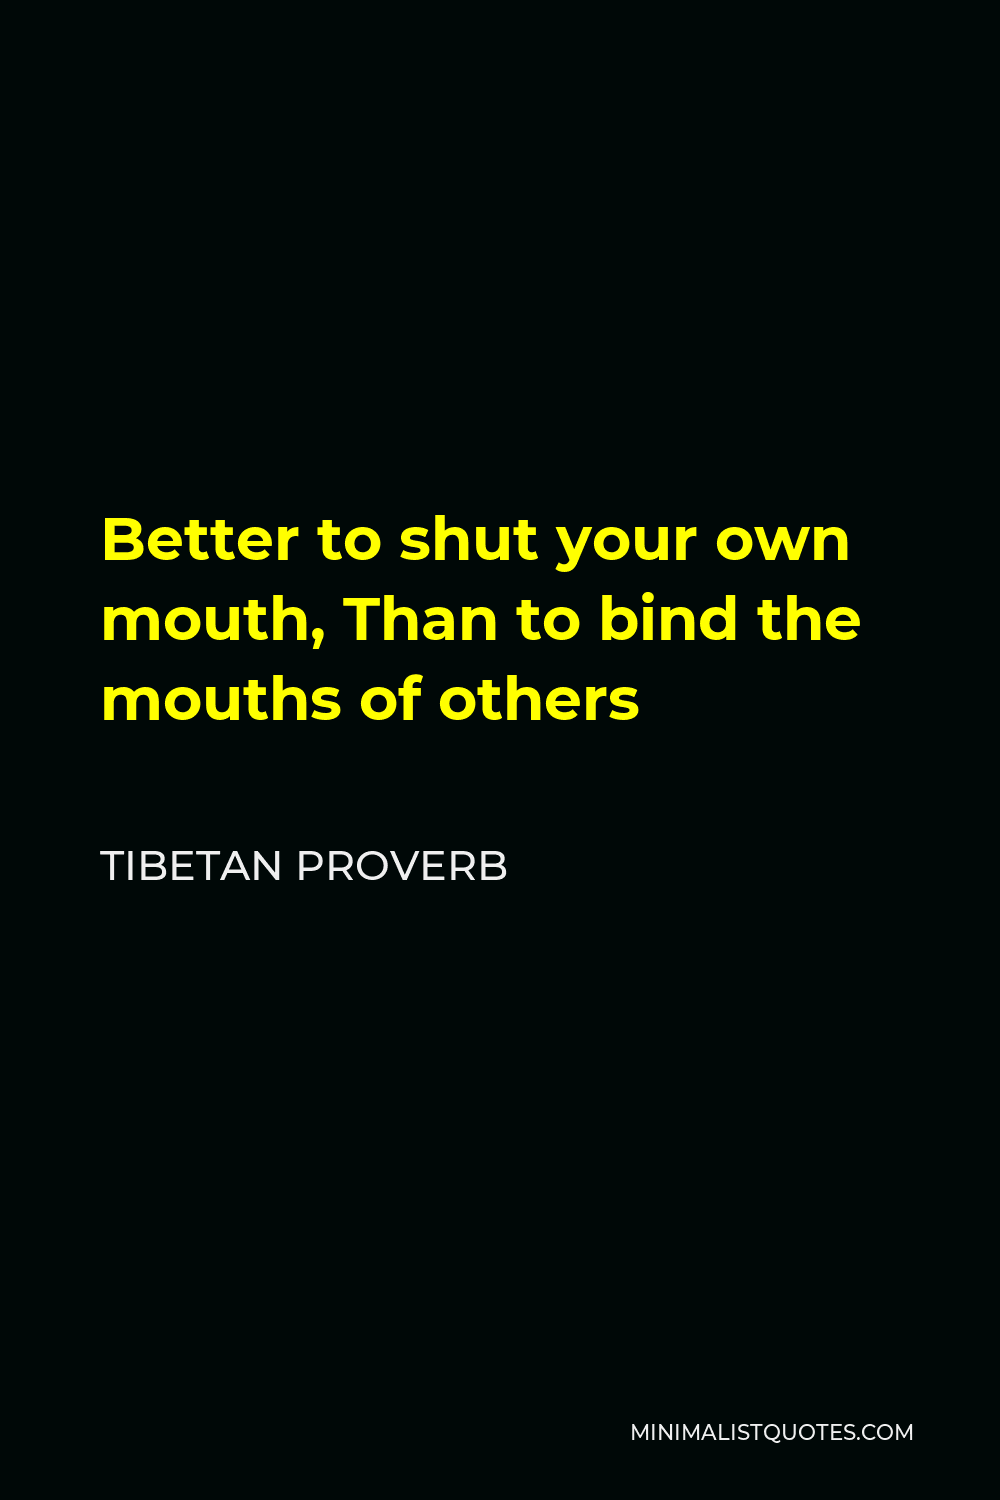 Tibetan Proverb Quote - Better to shut your own mouth, Than to bind the mouths of others